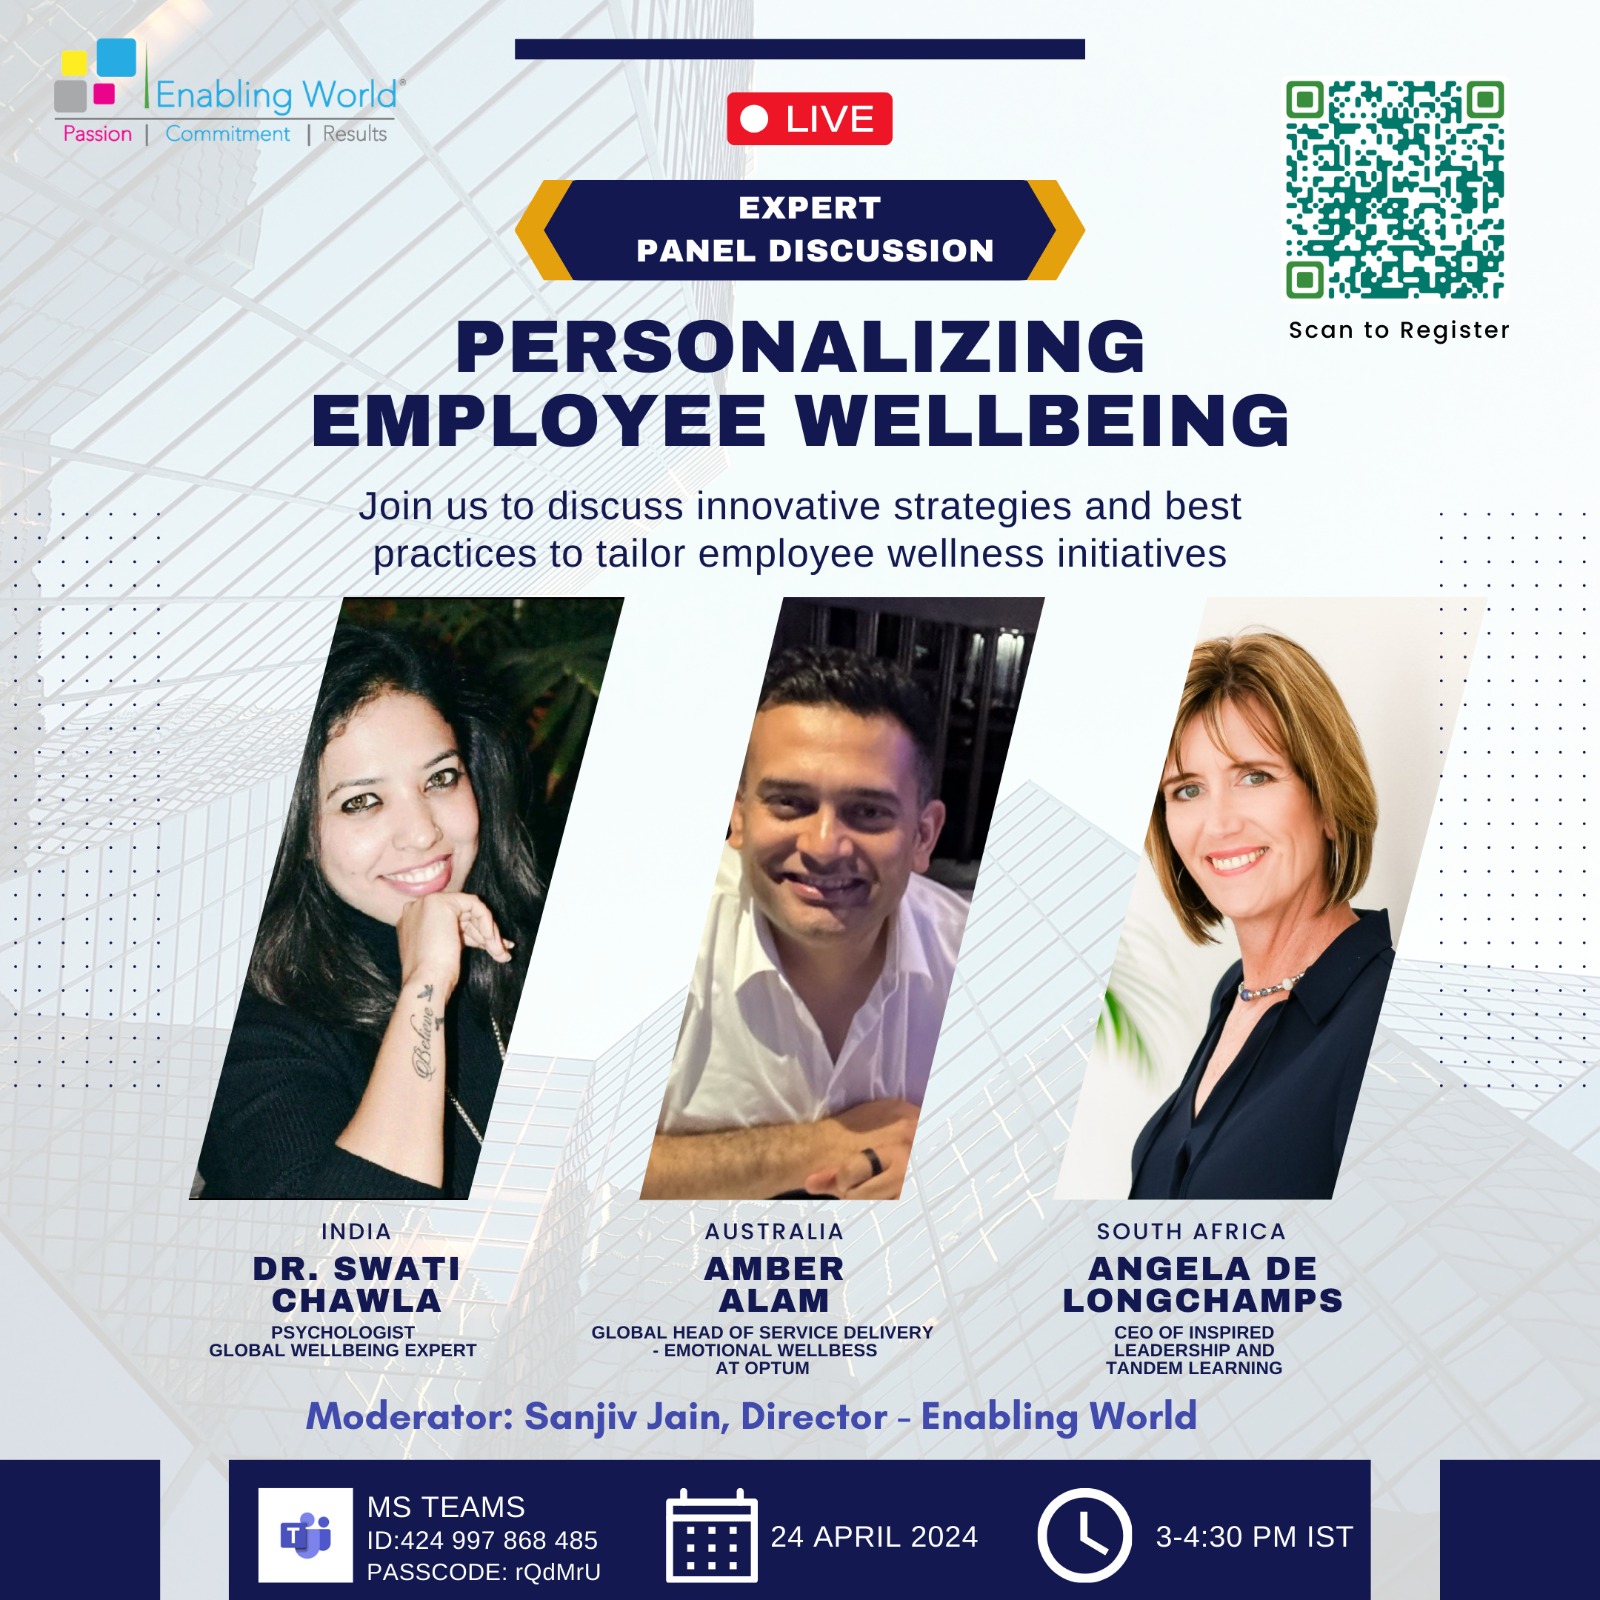 “Personalizing Employee Wellbeing” – Expert Panel Discussion